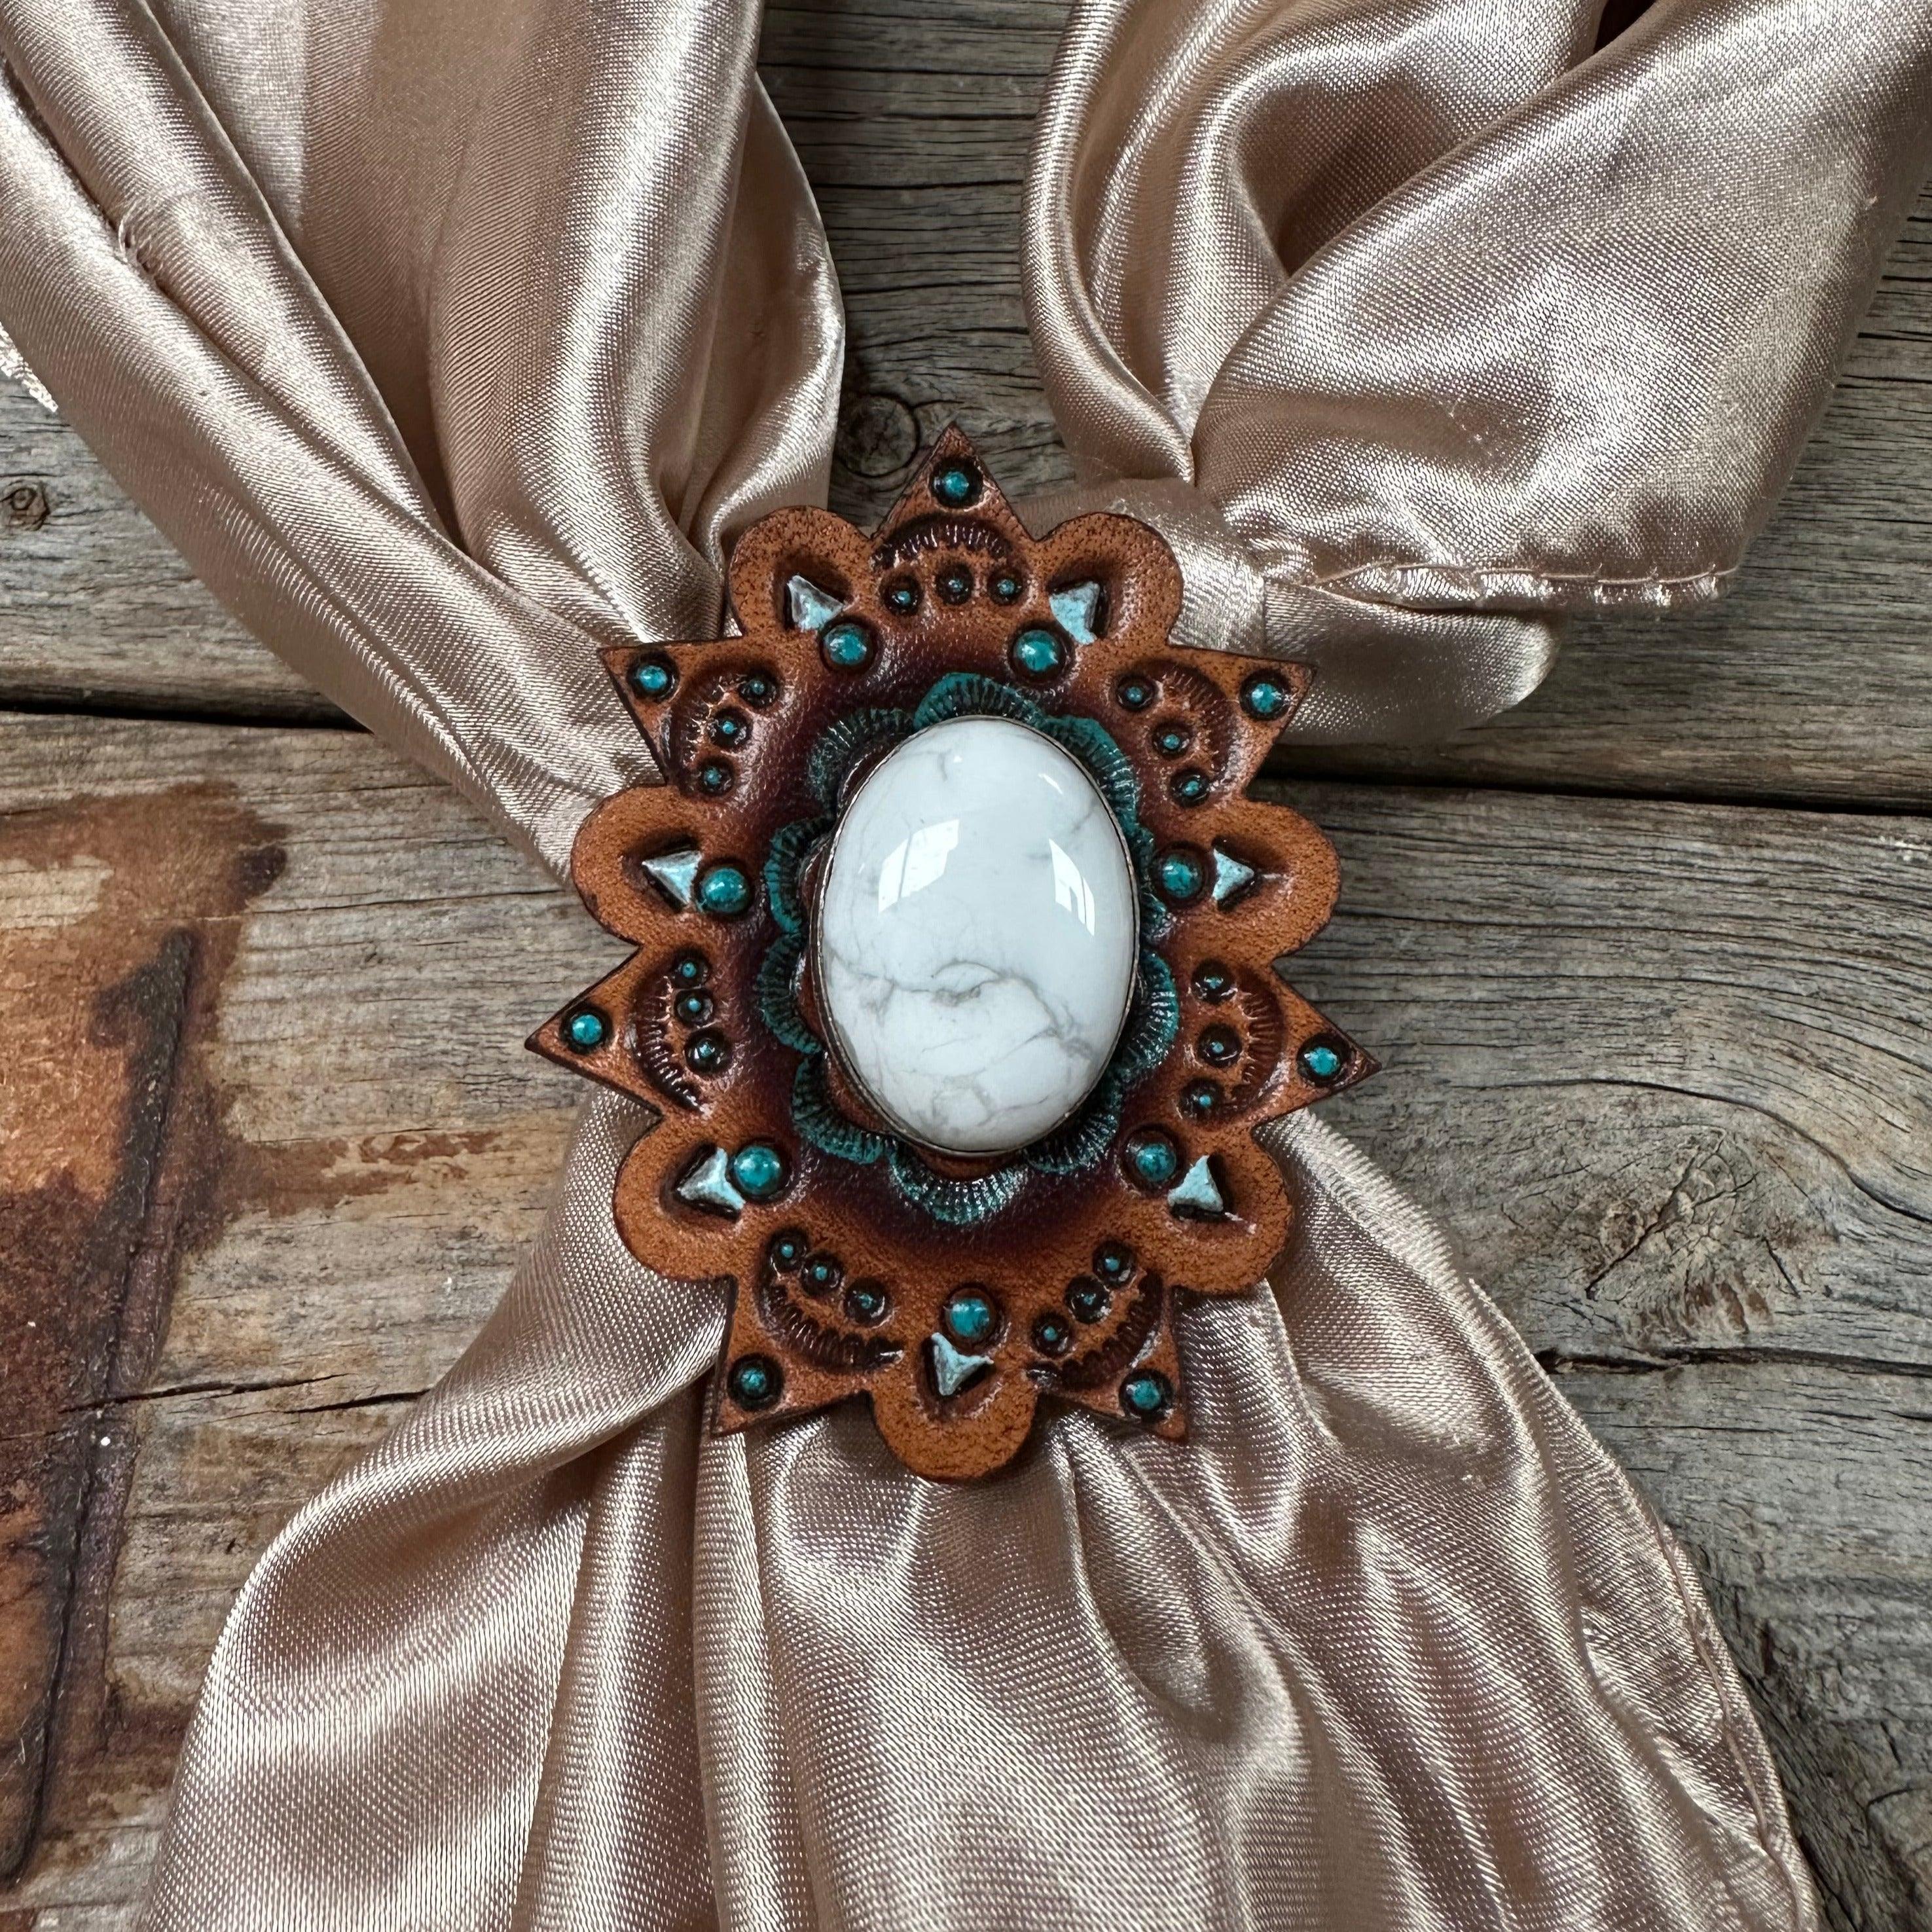 Leather Rosette with White Cabochon Wild Rag Slide #WRSR110WT - RODEO DRIVE